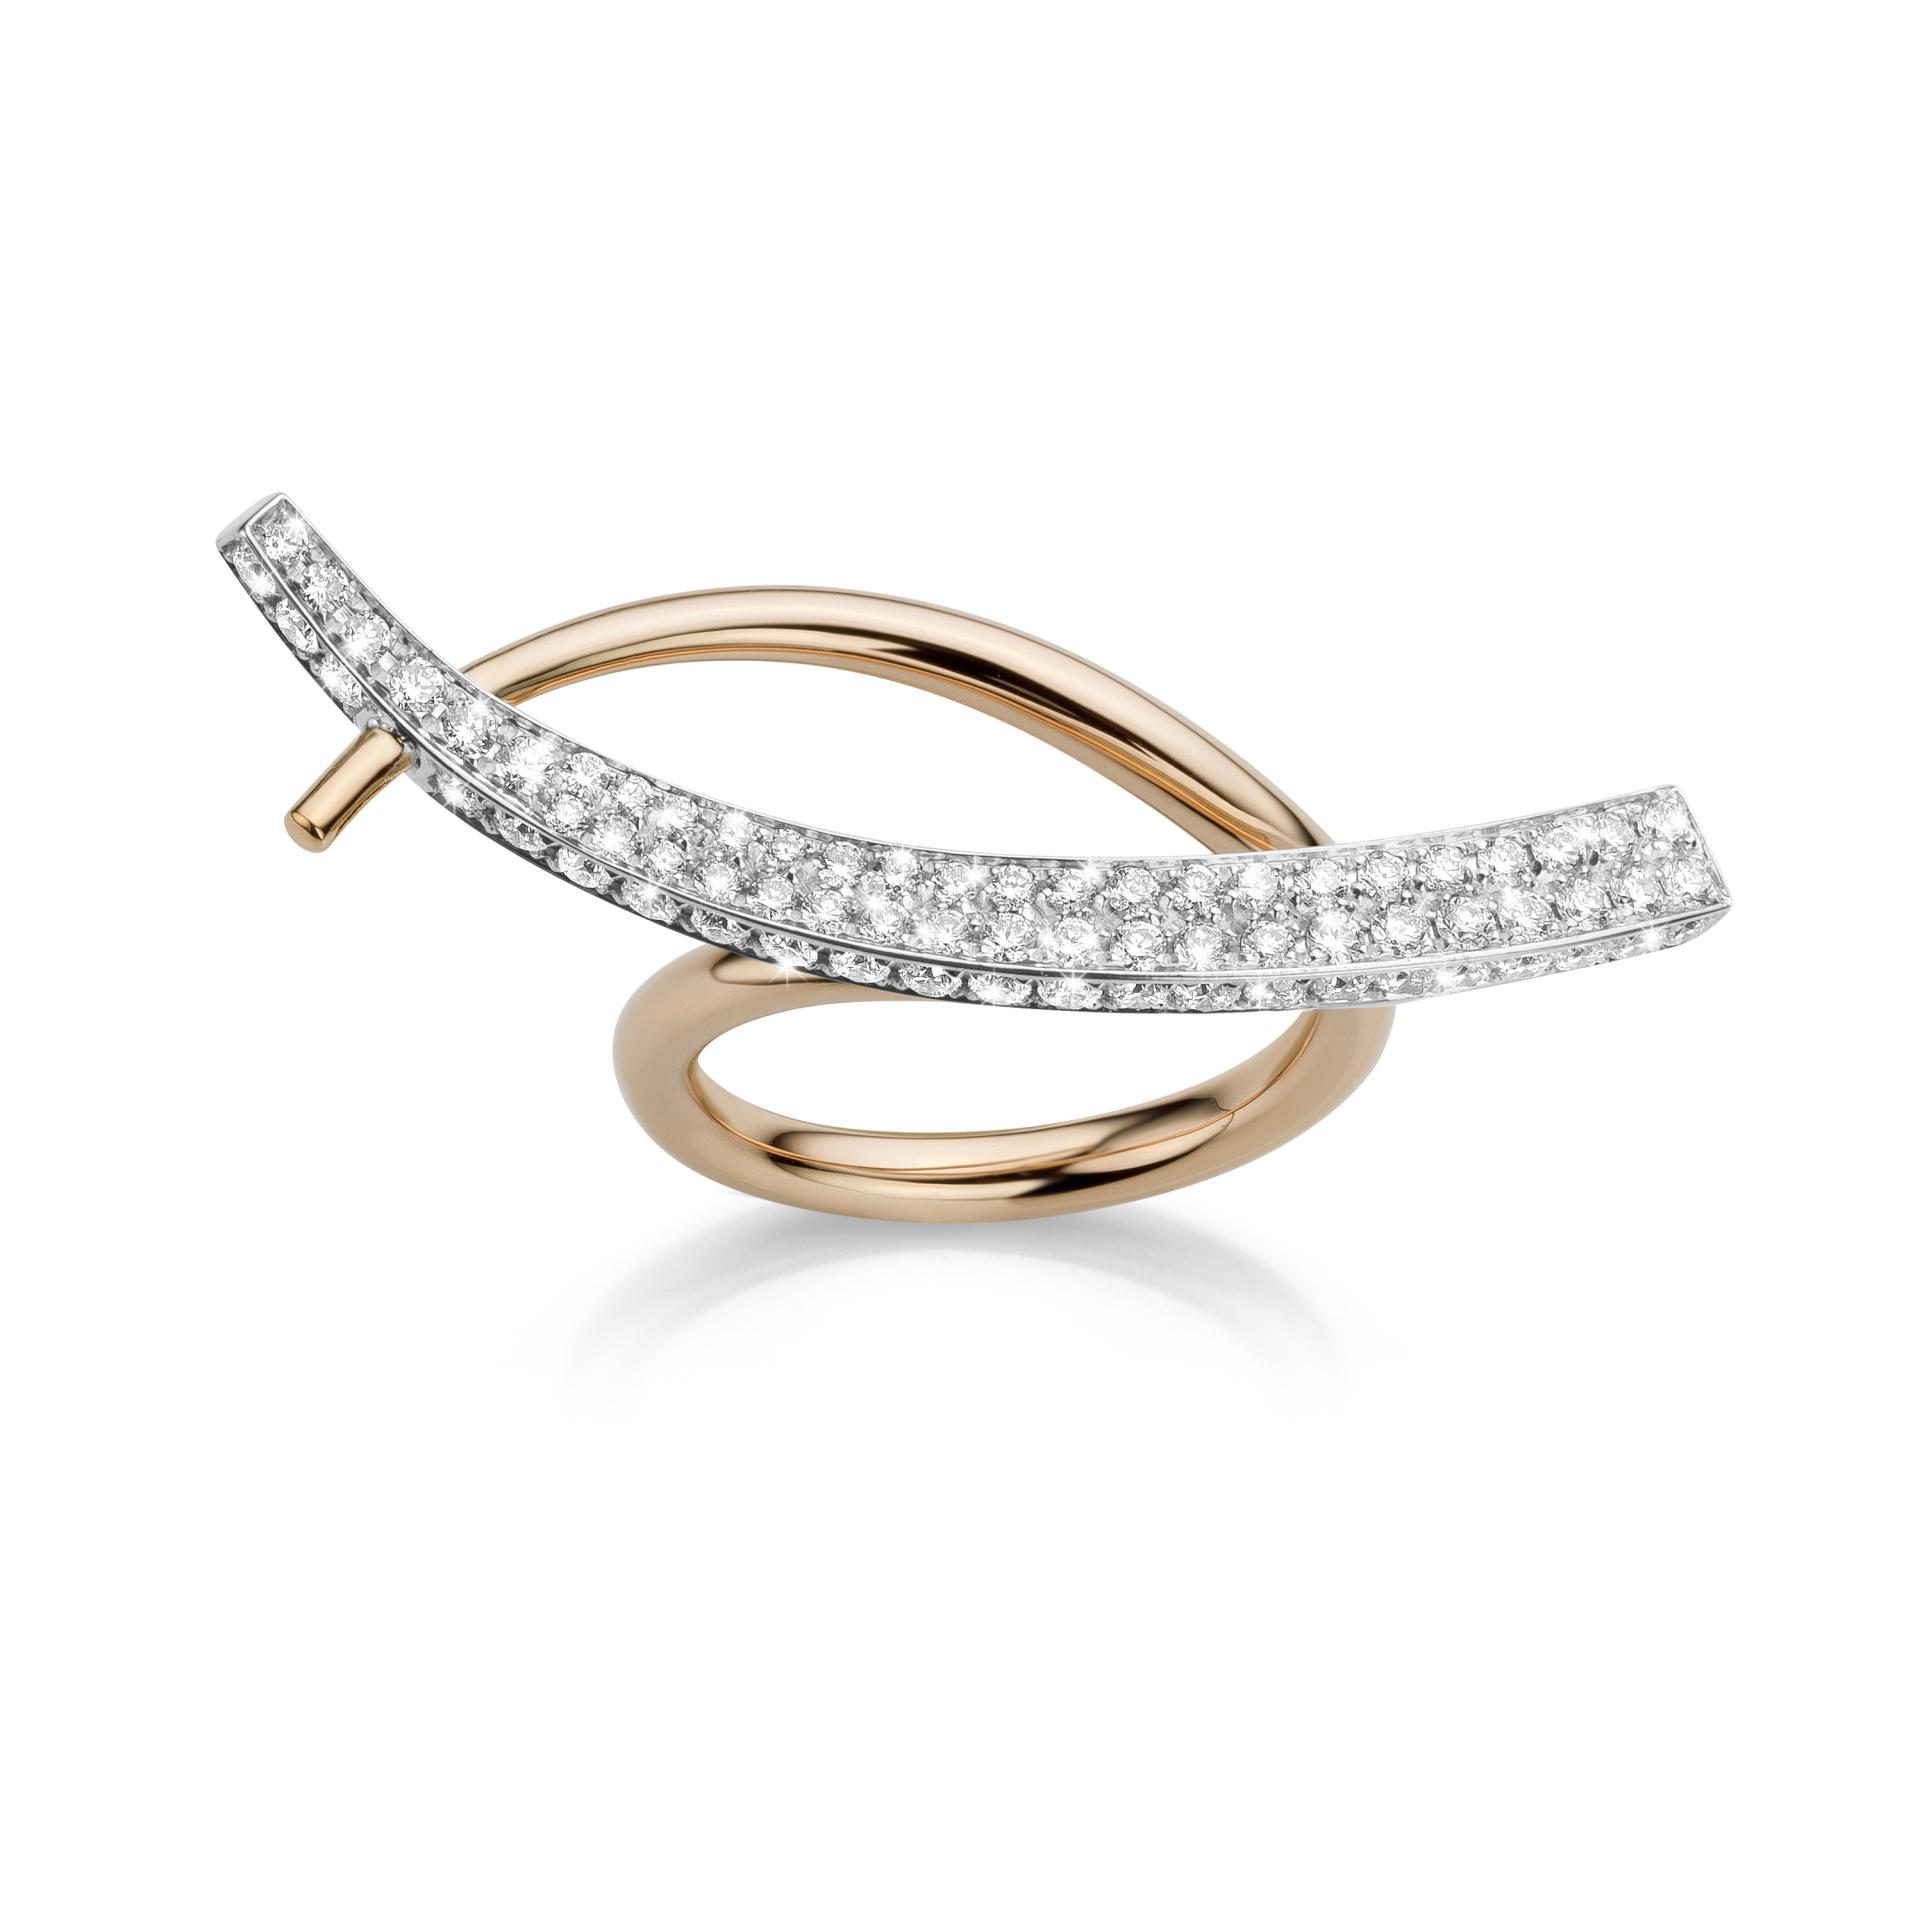 White and rose gold ring set with brilliant cut diamonds made by Maison De Greef